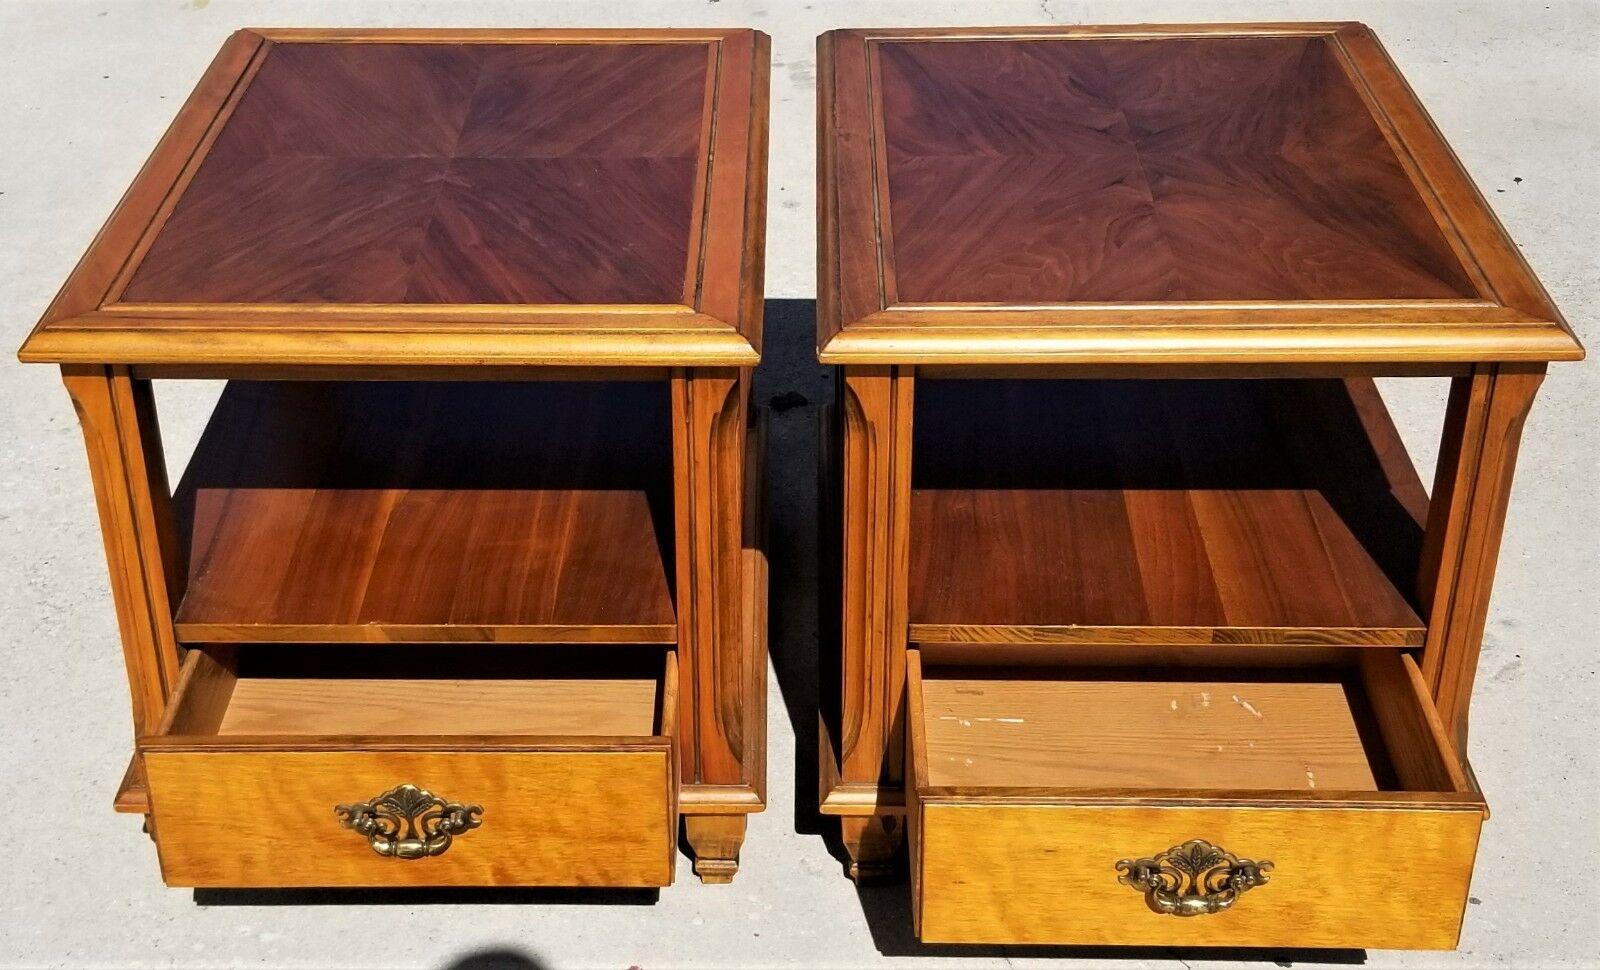 For FULL item description click on CONTINUE READING at the bottom of this page.

Offering One Of Our Recent Palm Beach Estate Fine Art Acquisitions Of A
Pair of Vintage Mid-Century Modern Italian Provincial Side End Tables w Drawers 

Approximate